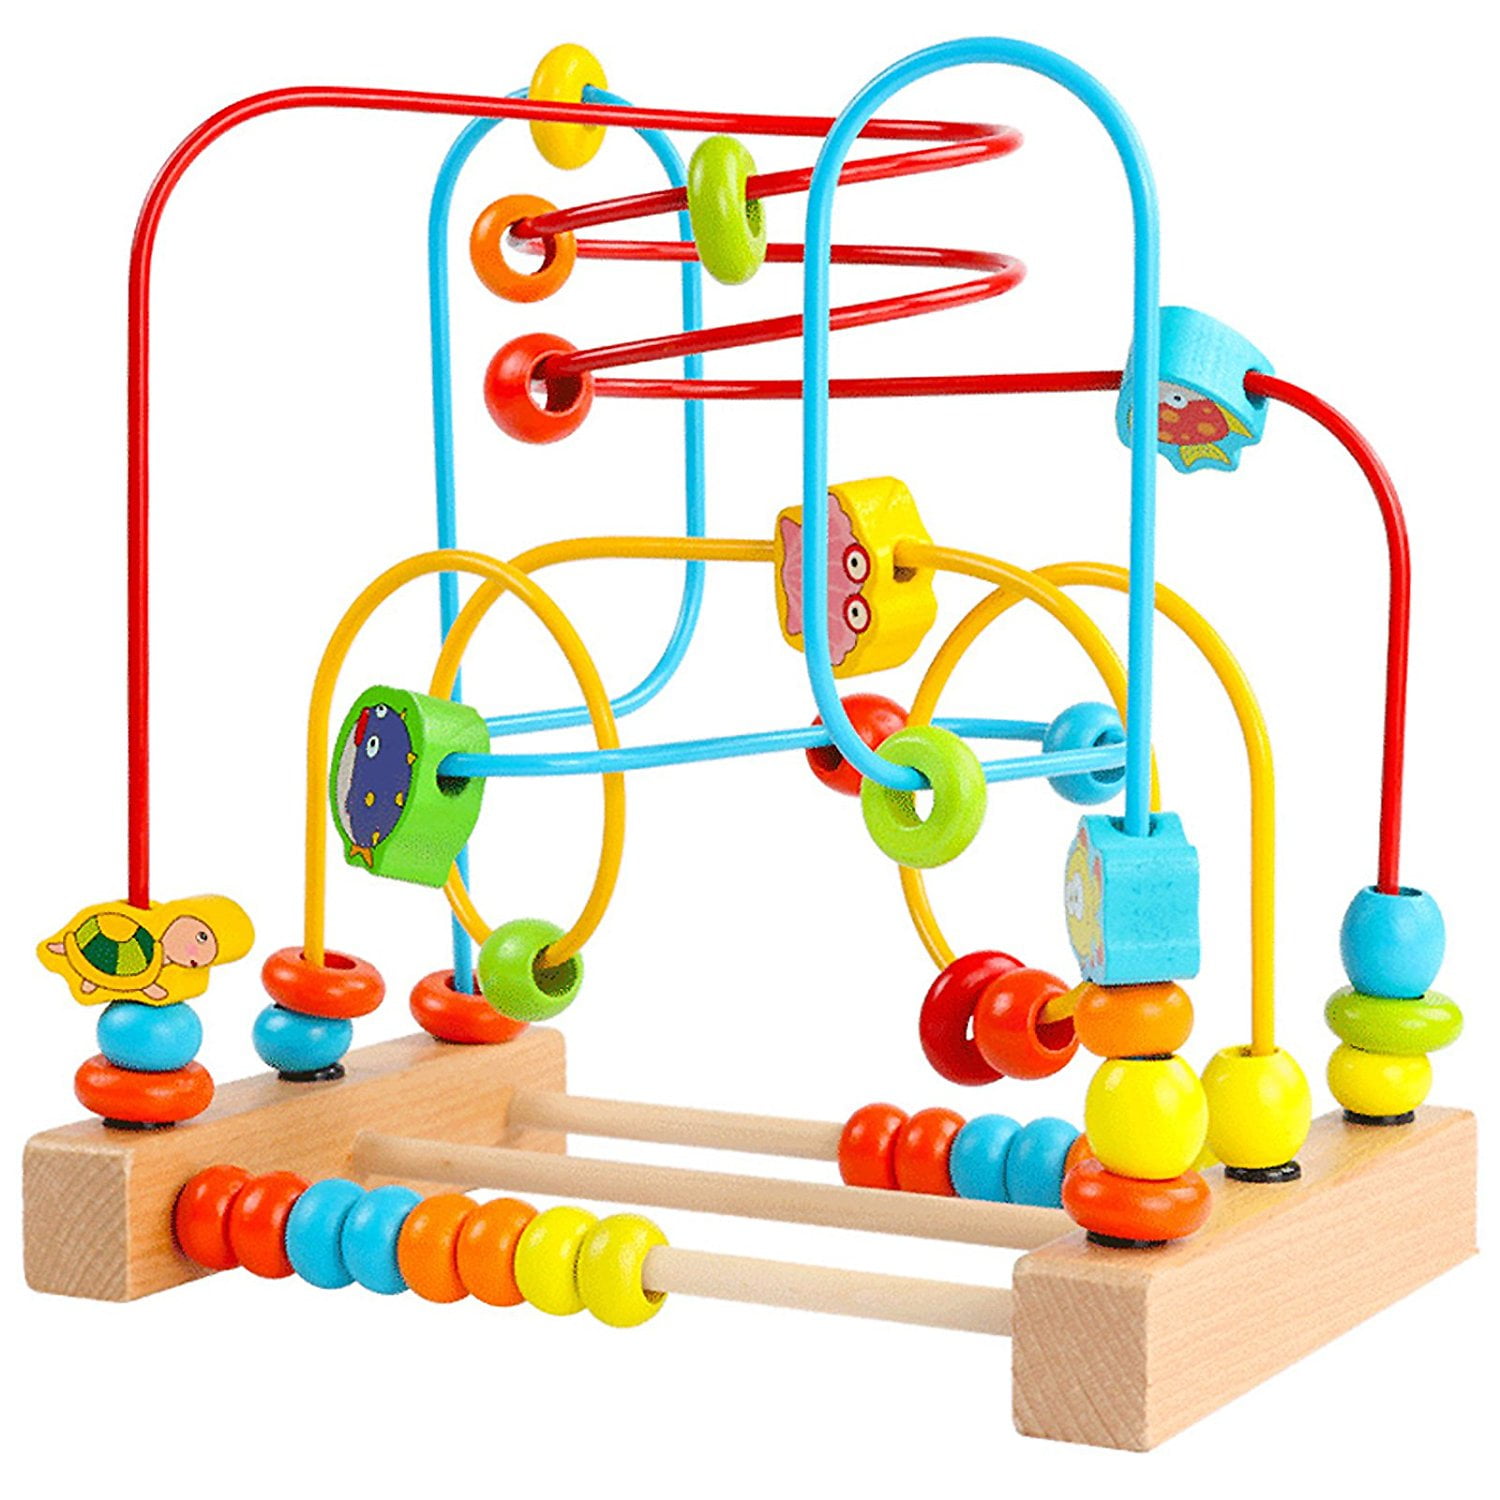 Toddler Baby Bead Maze Toy Toddlers Colorful Wooden Beads Educational Circle Toy 